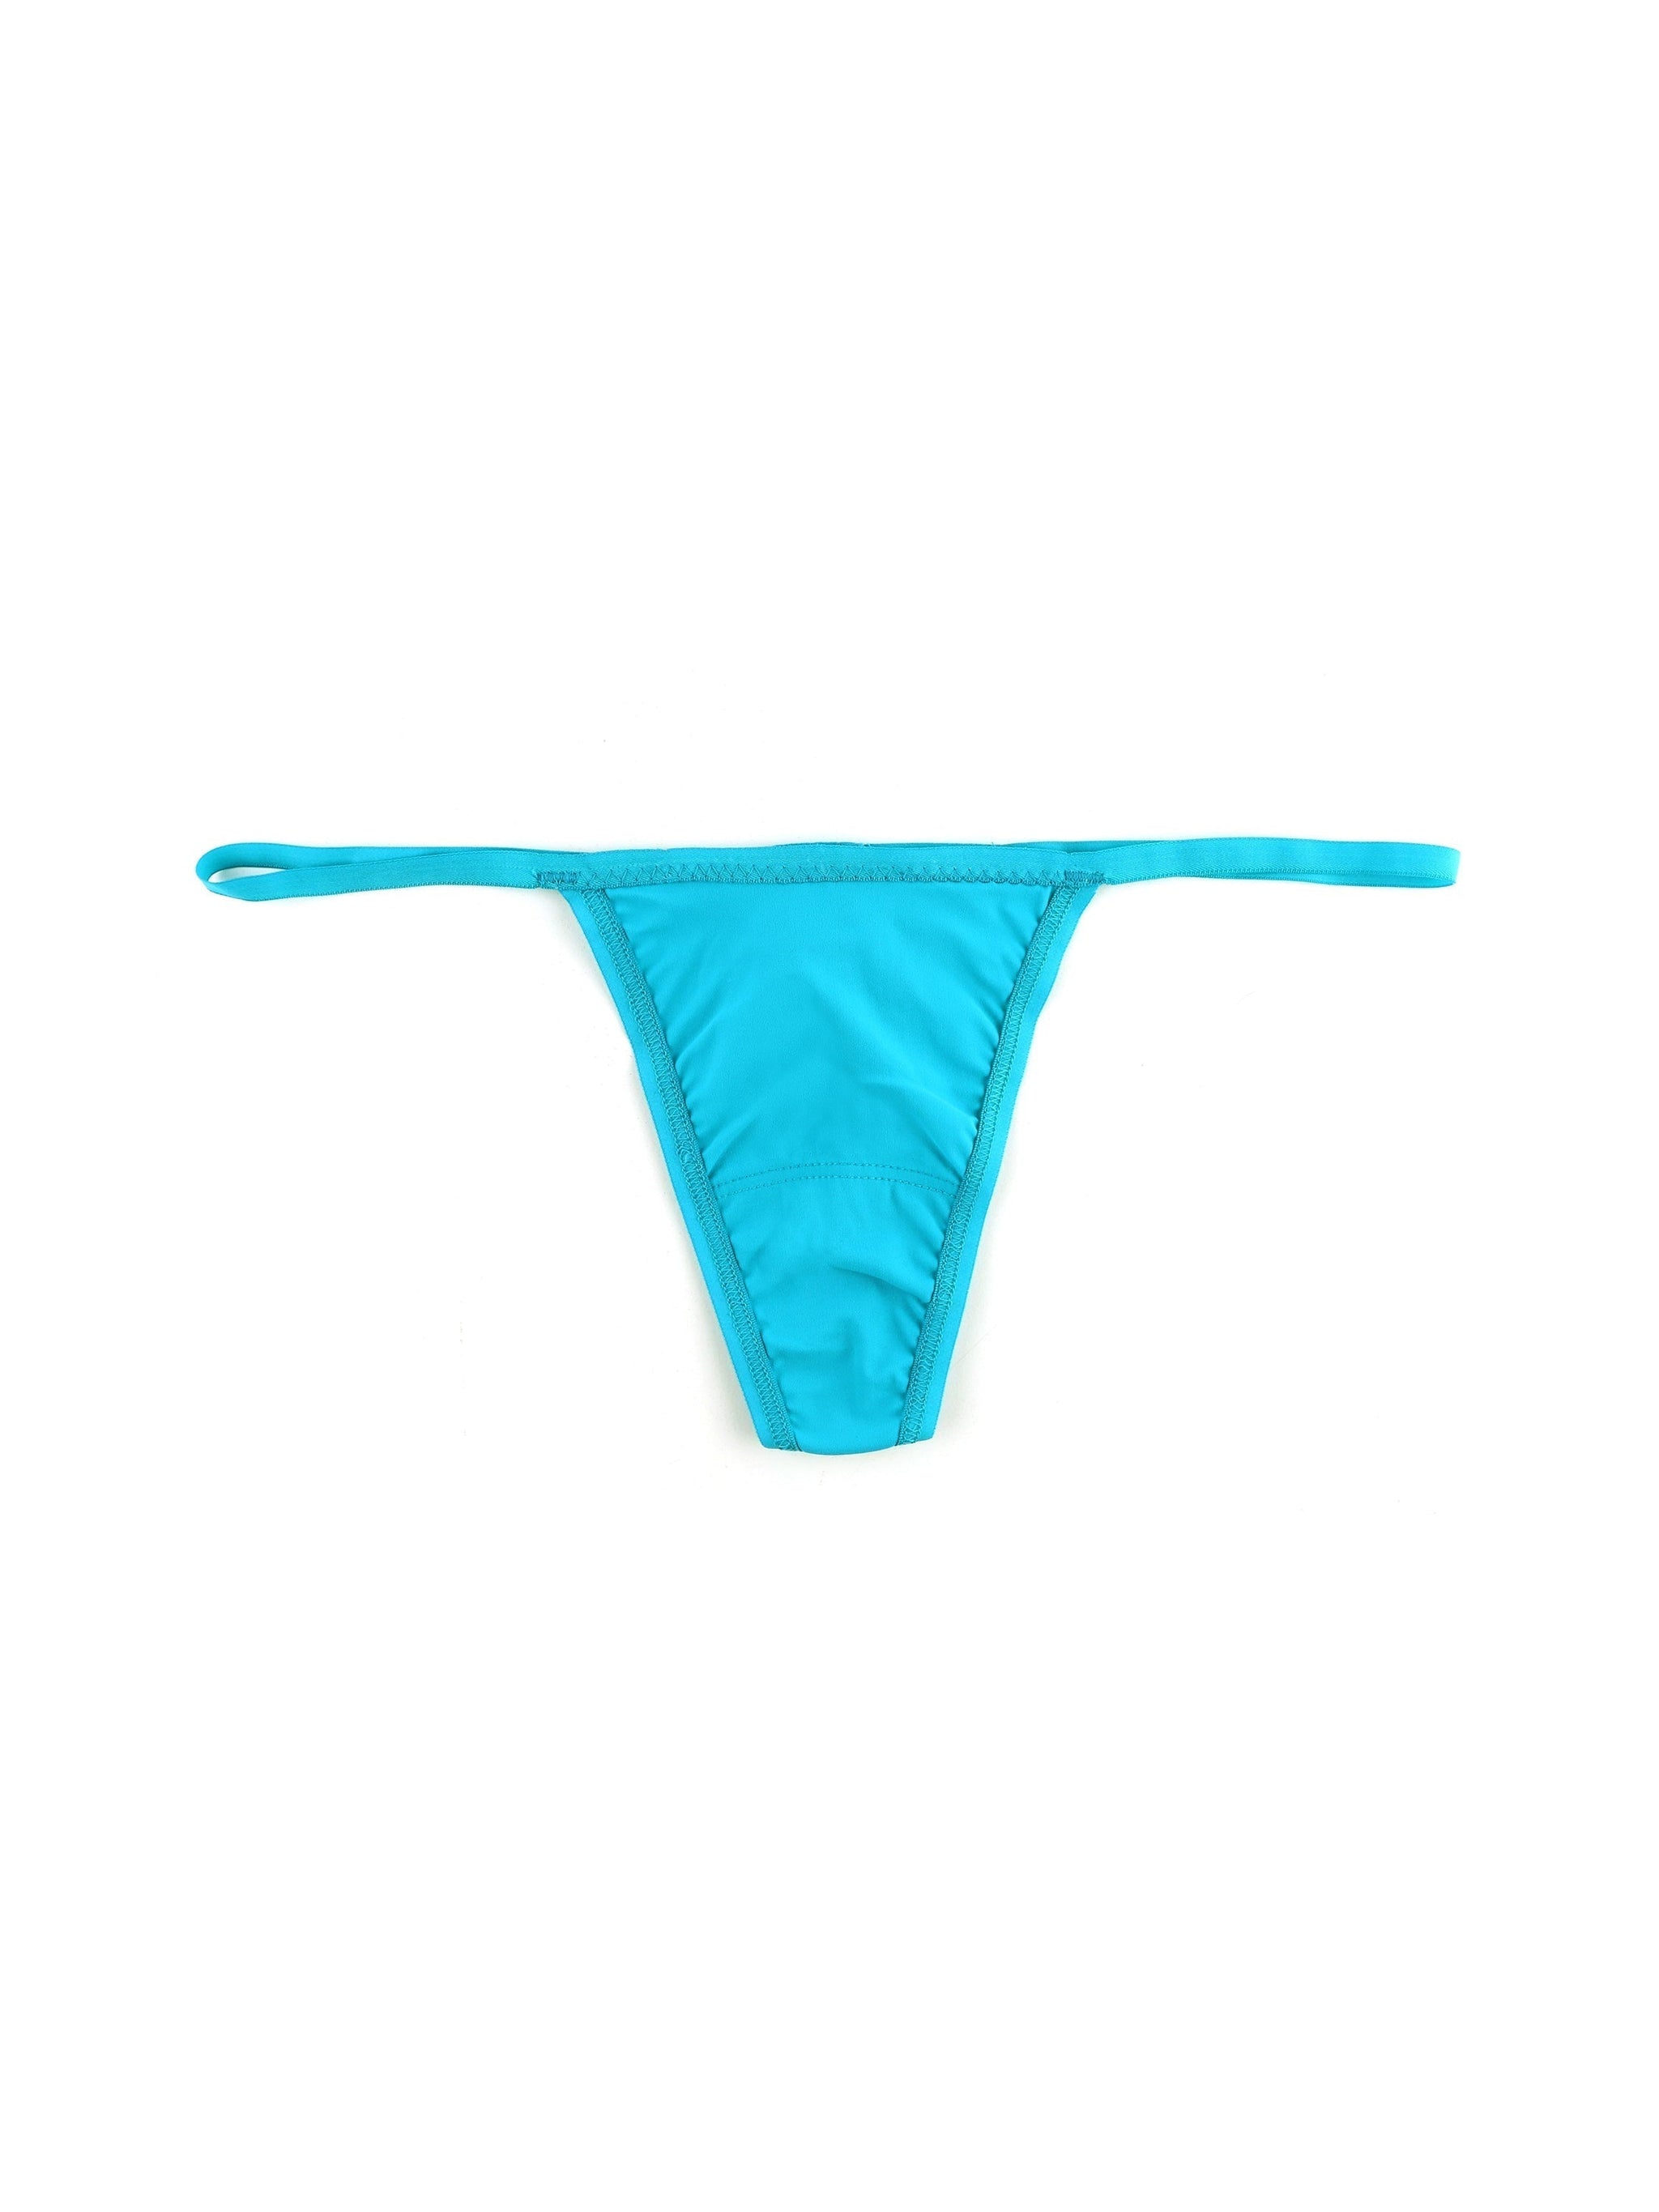 Buy Standard Quality China Wholesale Ladies G-string Sexy Thong